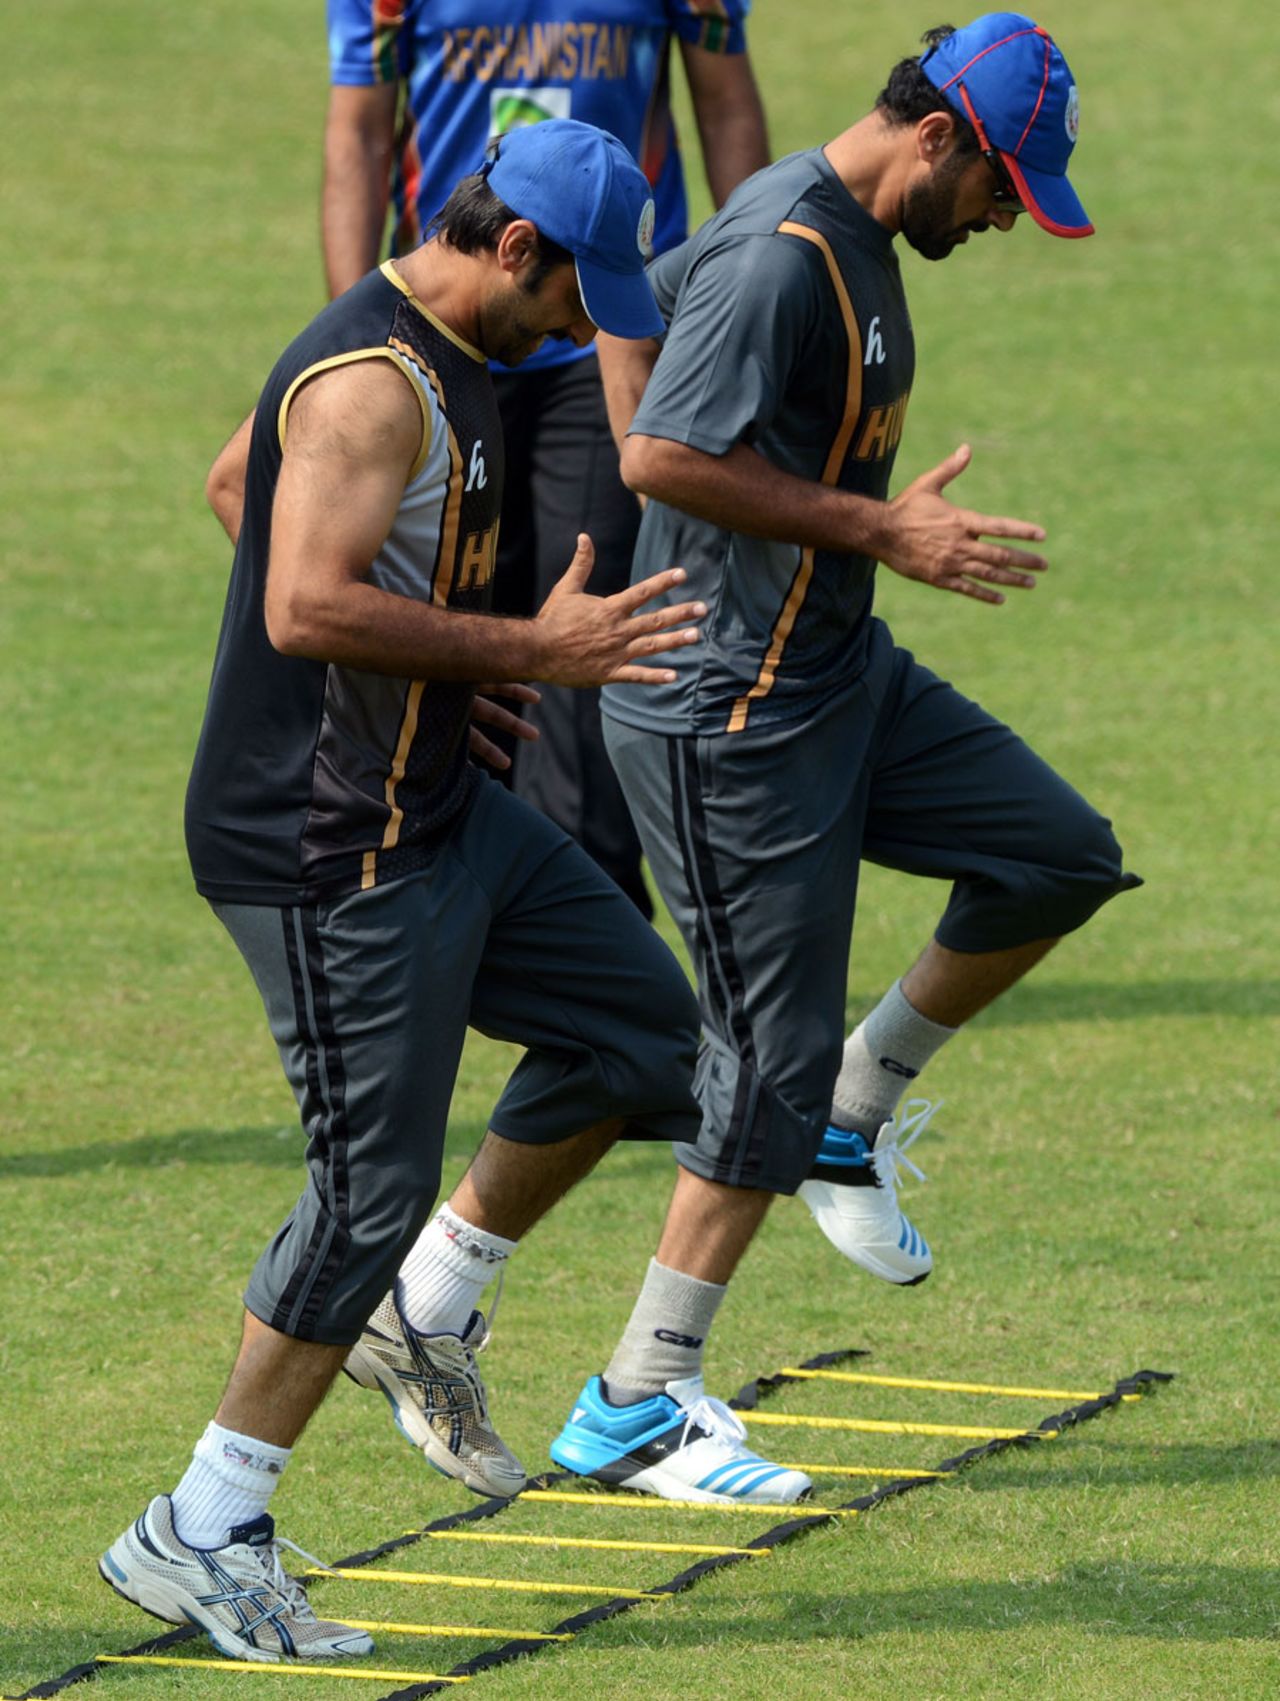 Asghar Stanikzai and a team-mate go through the paces during training, Mirpur, February 24, 2014